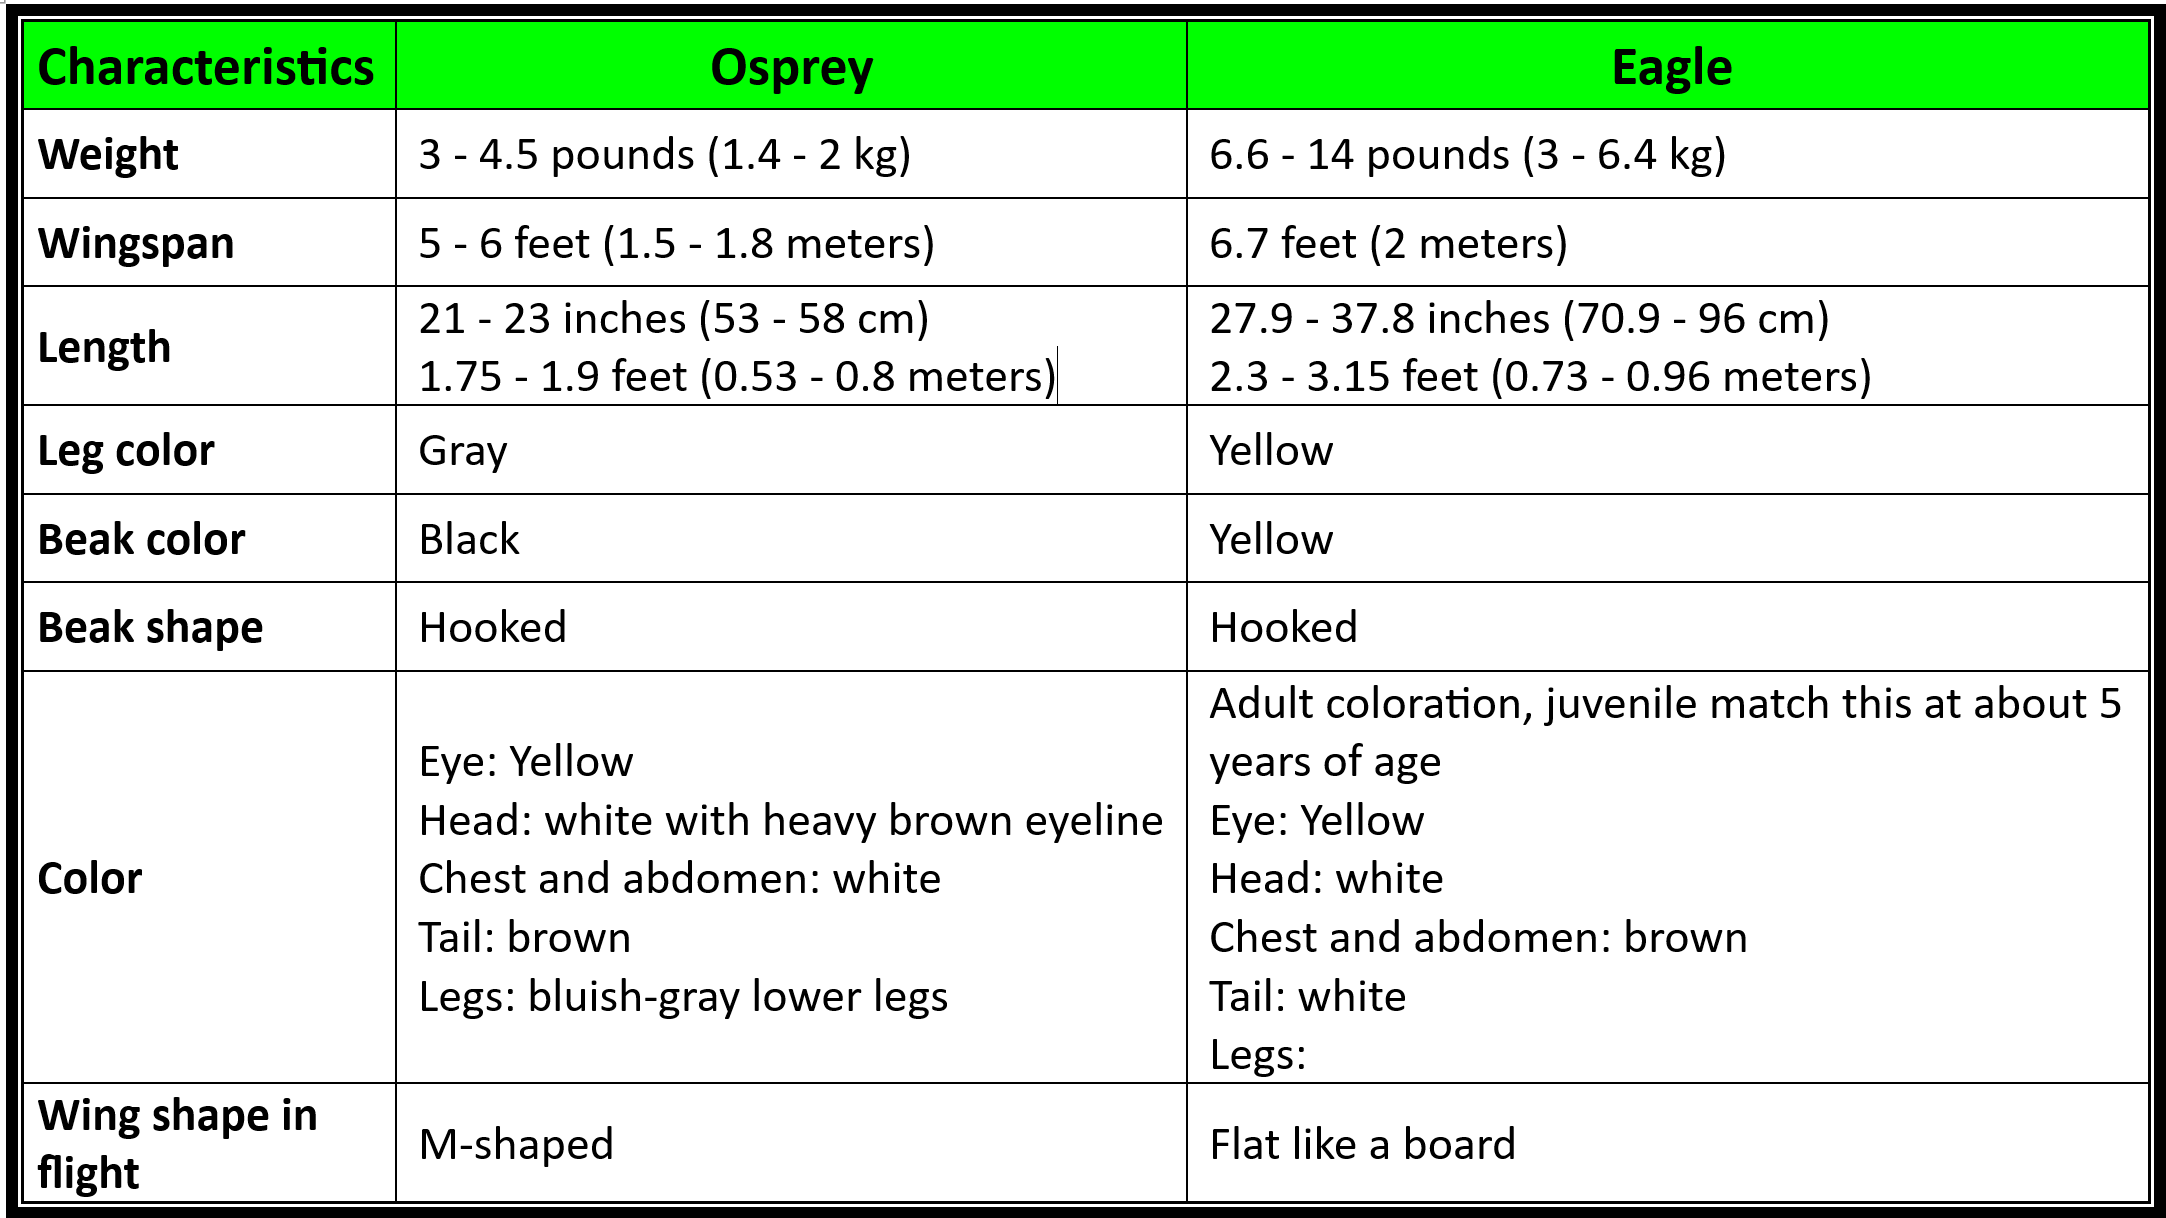 Graphic showing the visual differences between the Osprey and the American Bald Eagle